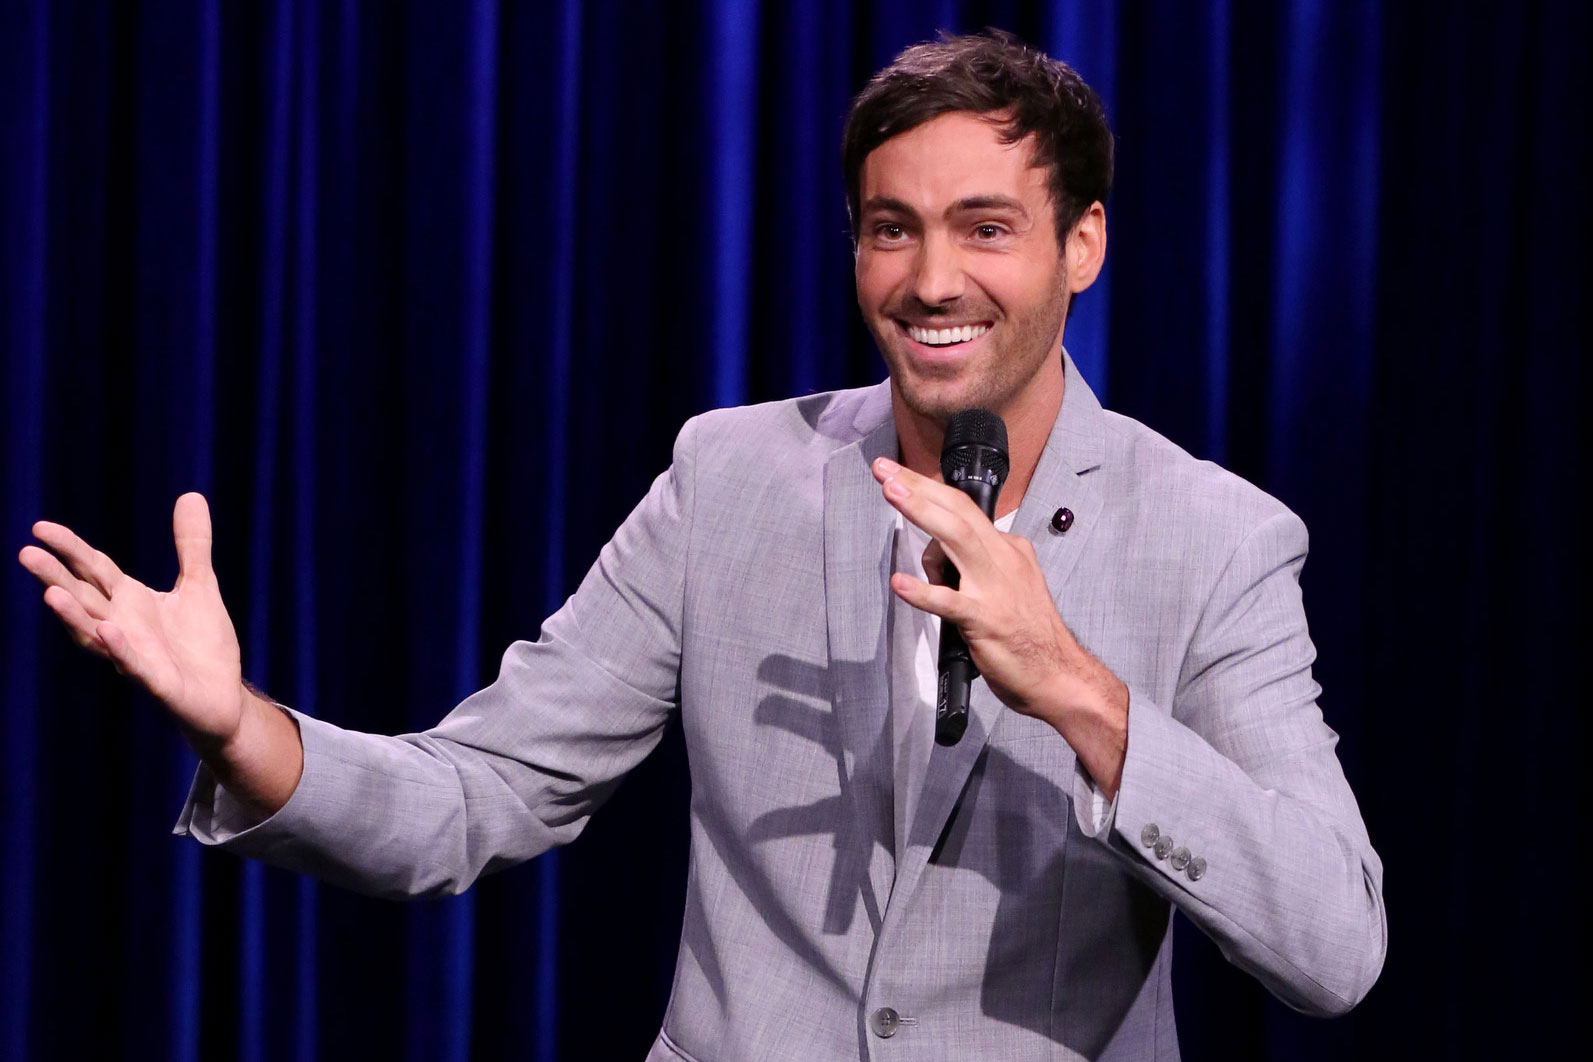 Comedian Jeff Dye to Perform at Central